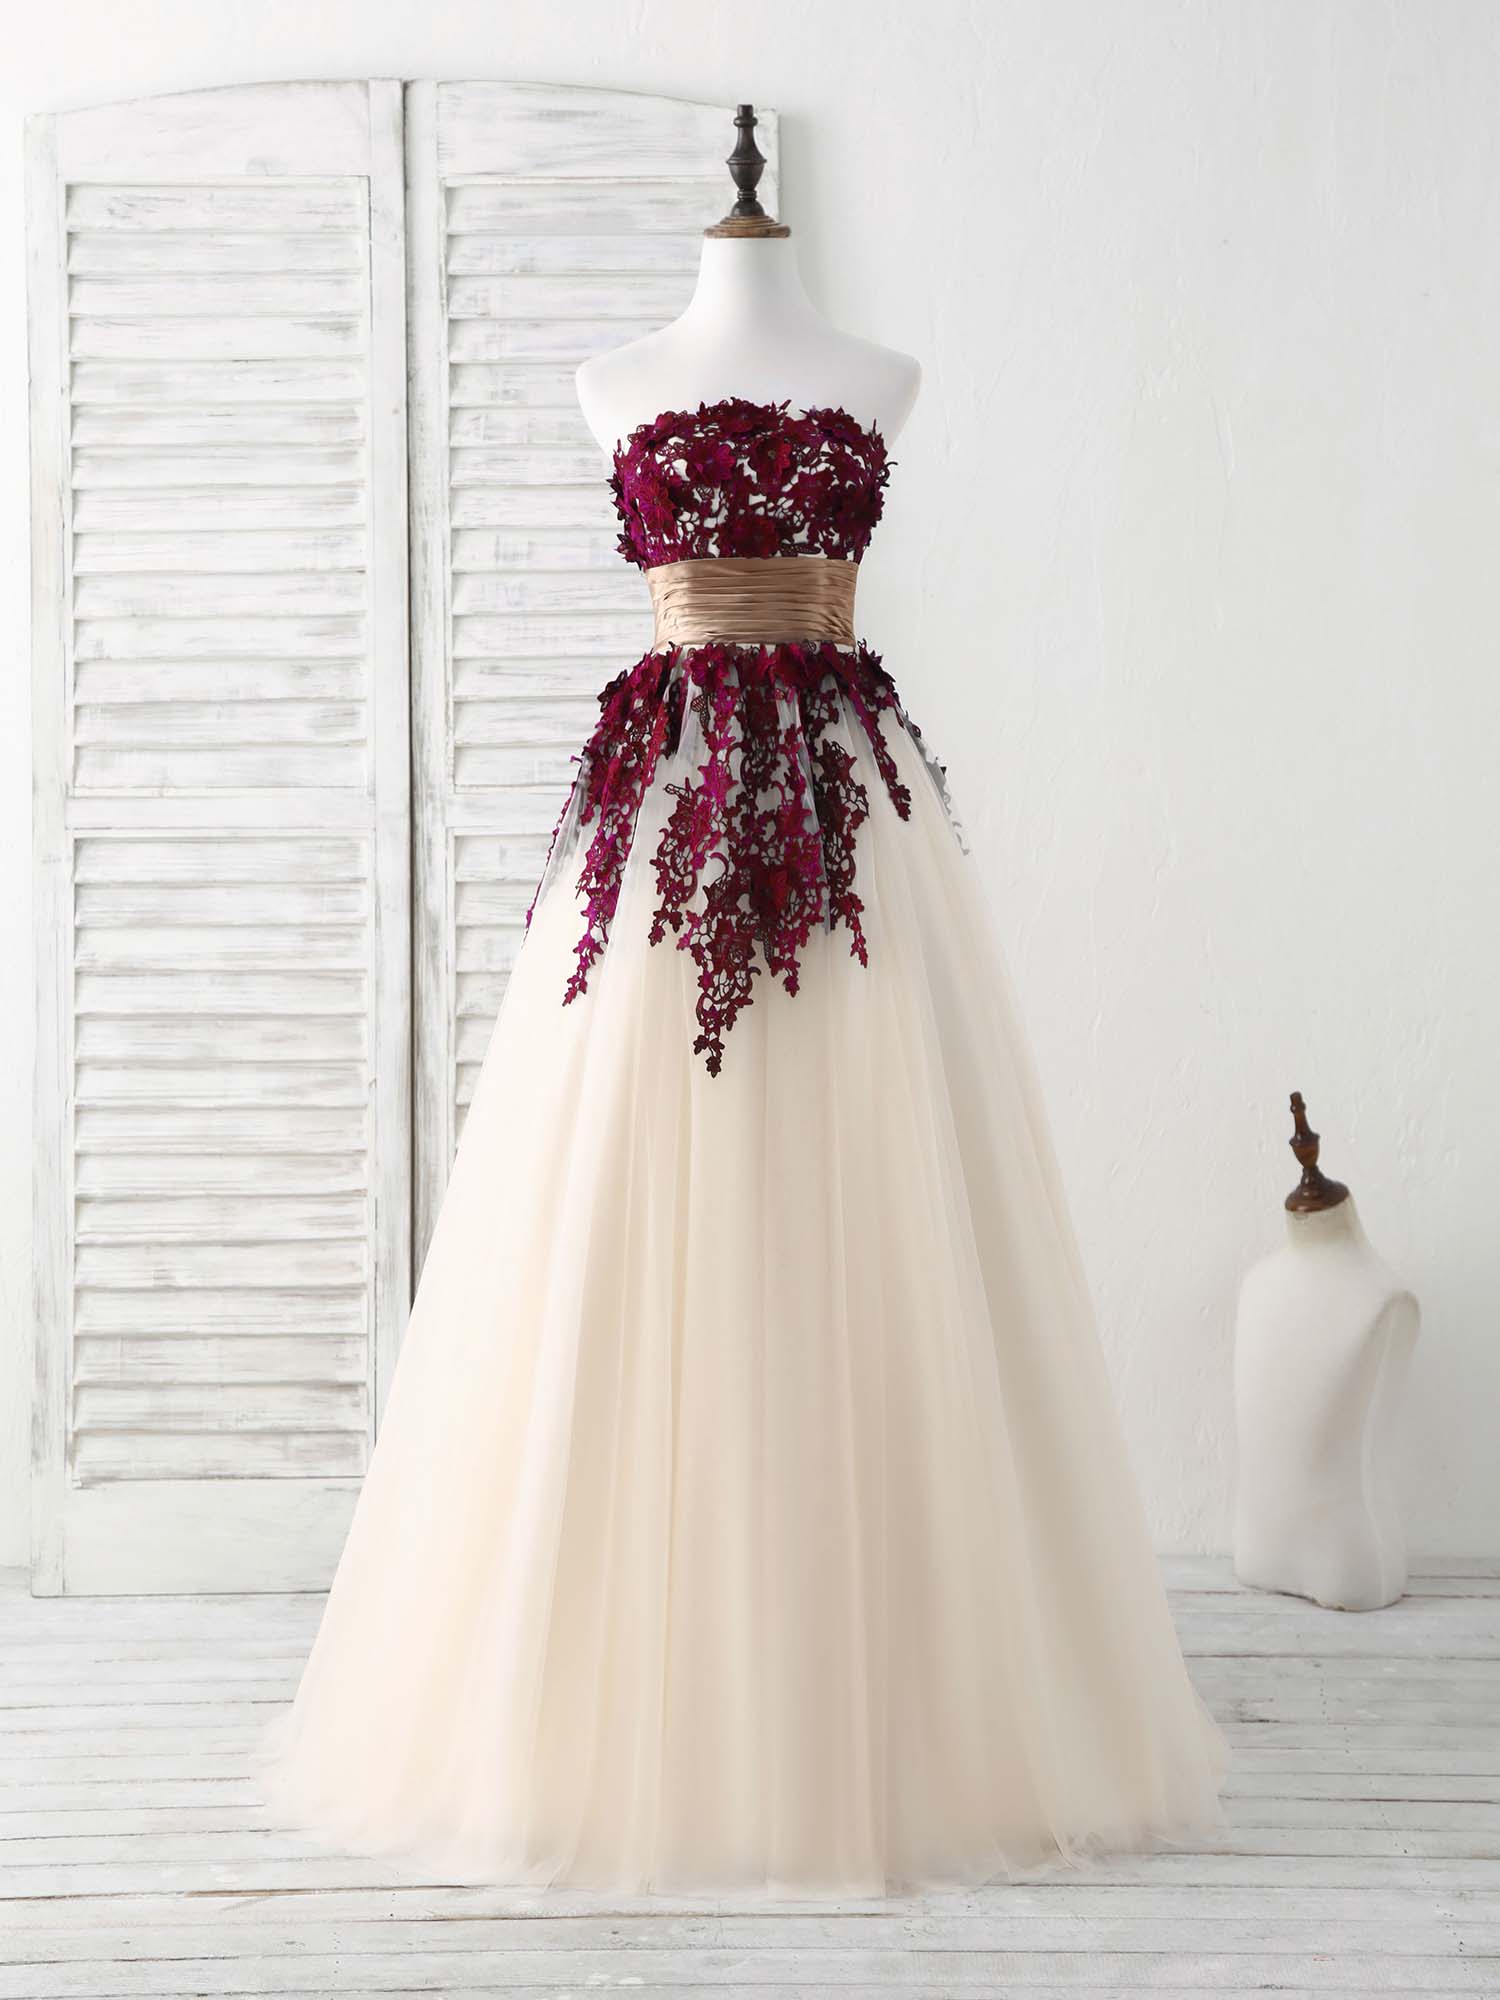 Burgundy Lace Applique Tulle Long Prom Dress Outfits For Women Burgundy Bridesmaid Dress